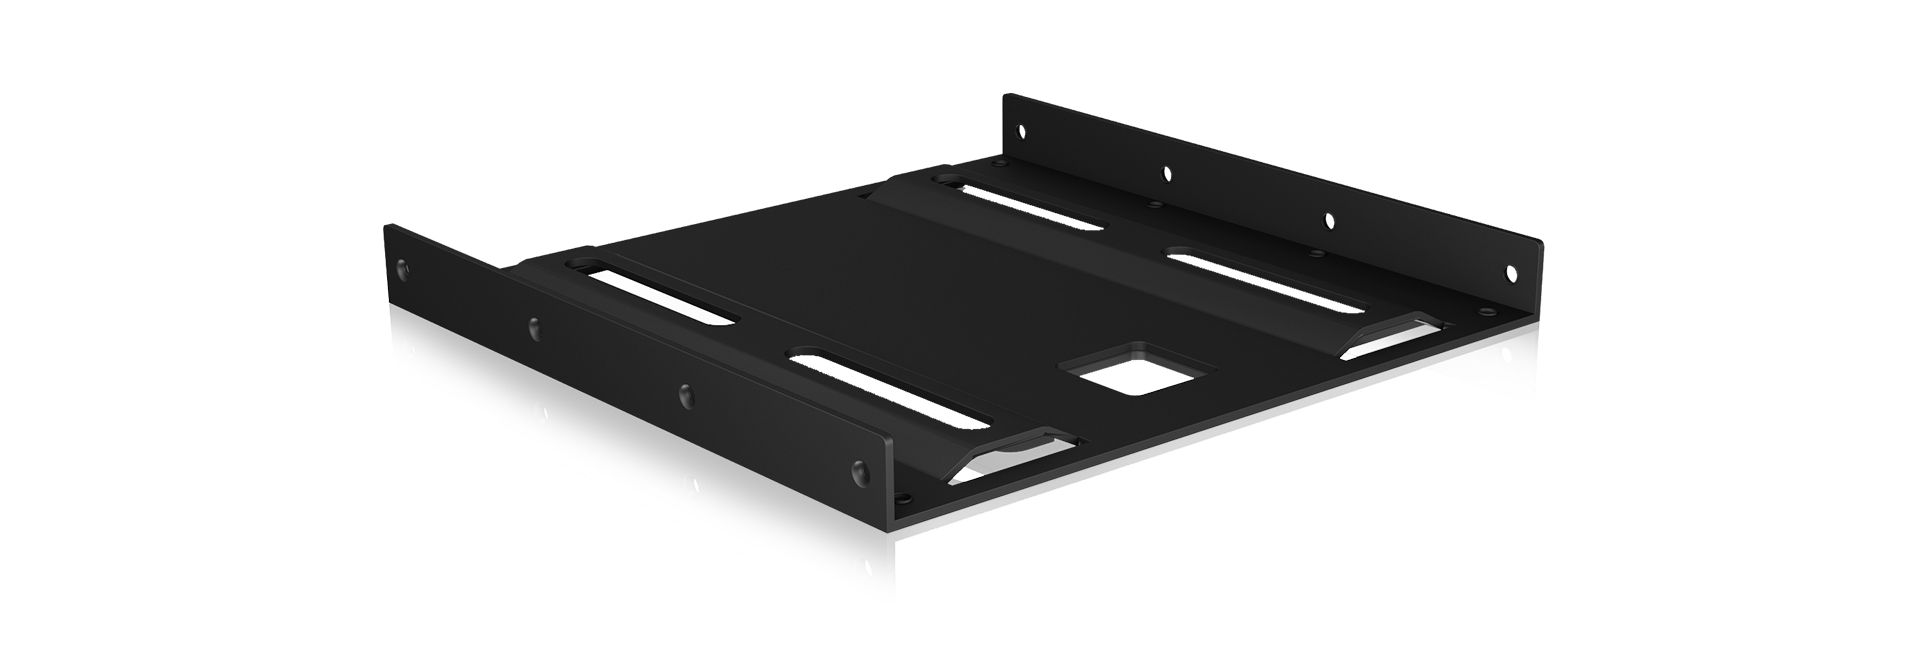 ICYBOX IB-AC653 IcyBox Internal Mounting frame 3,5 for 2.5 HDD/SSD, Black_6